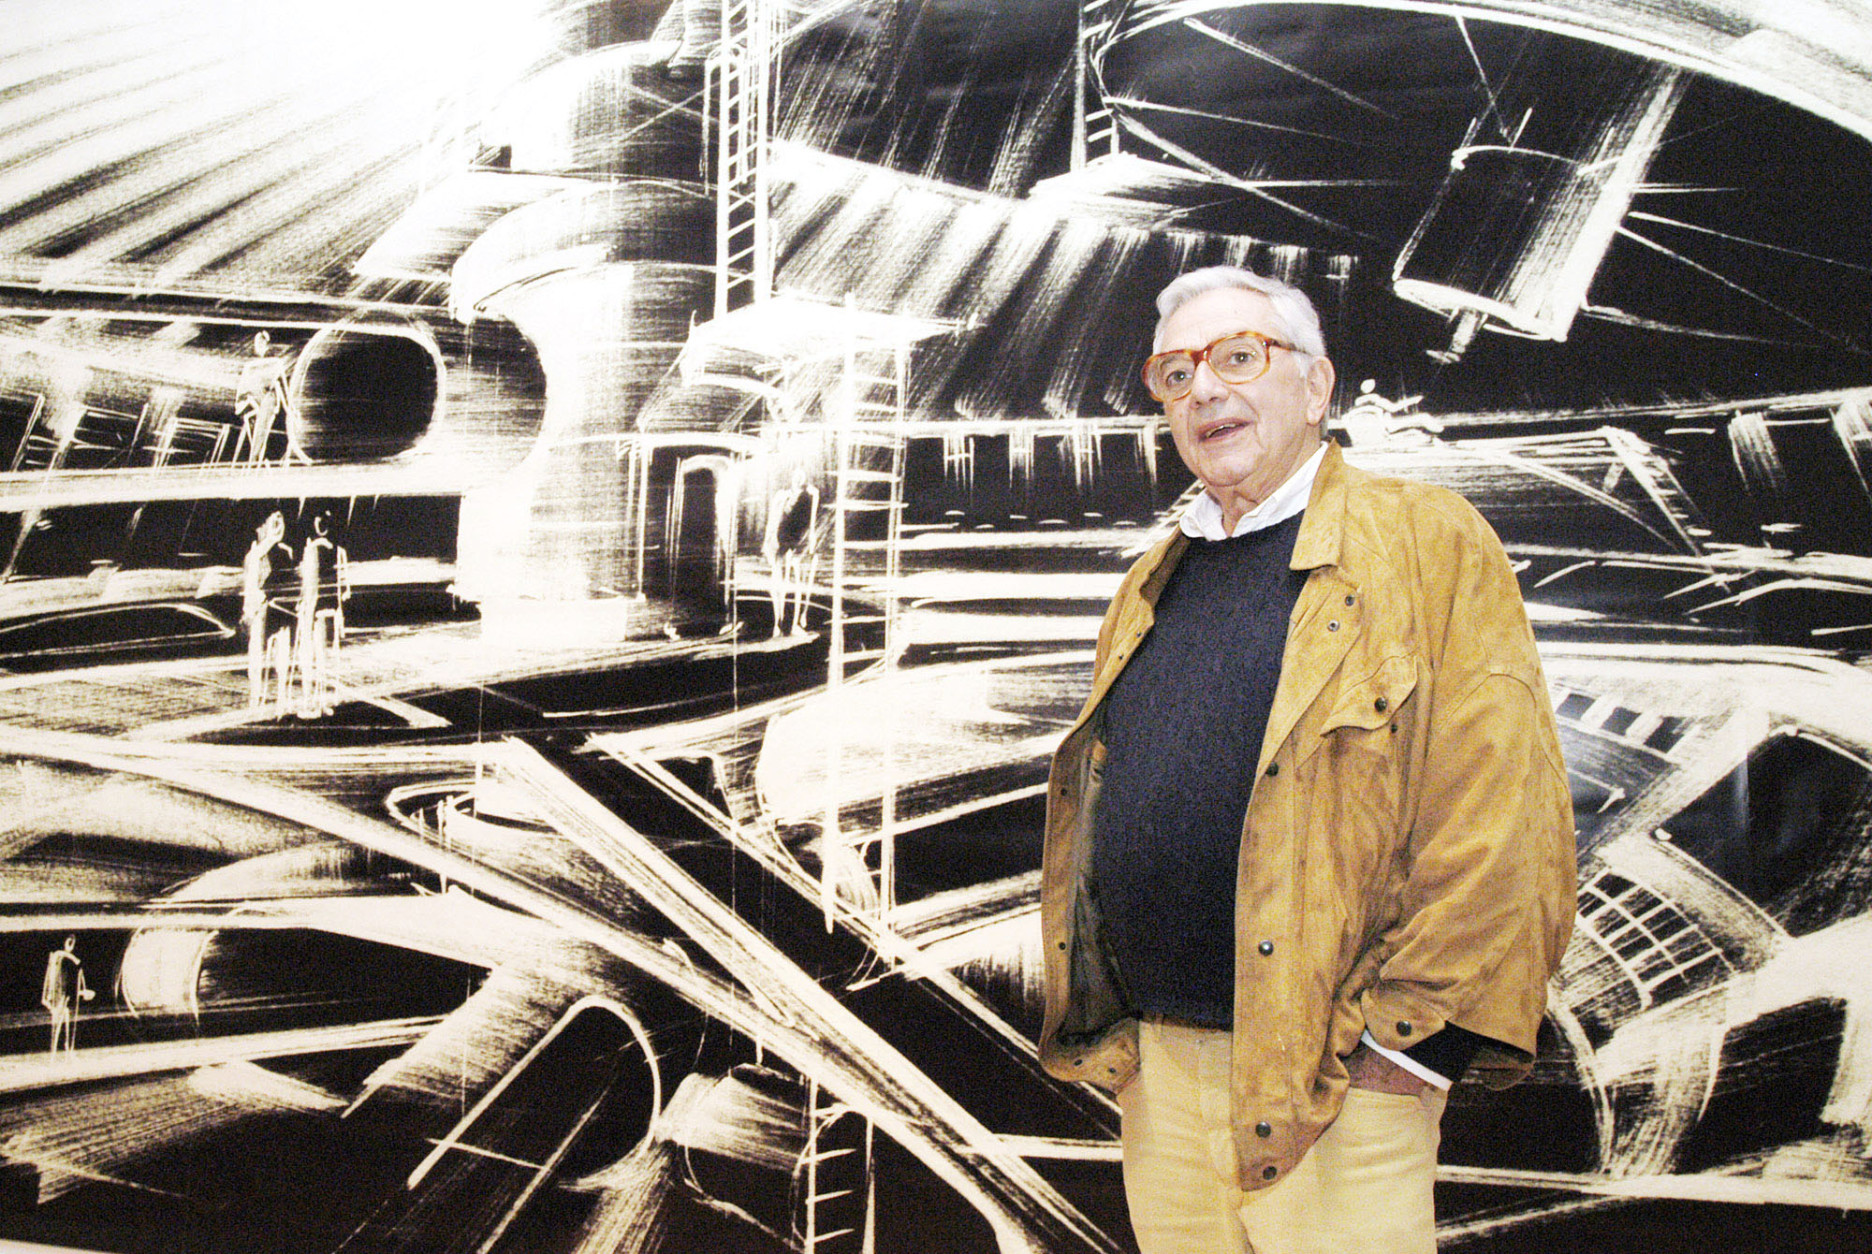 FILE - In this Oct. 31, 2002 file photo, German film designer Ken Adam stands in front of one of his futuristic designs at the exhibition "James Bond - Berlin - Hollywood" in the museum "Martin-Gropius-Bau" in Berlin. Adam died at the age of 95. His death was confirmed Thursday, March 10, 2016, by the official James Bond Twitter account. Adams death was first reported by the BBC, which said he died at his home in London. (AP Photo/Jens Meyer, File)